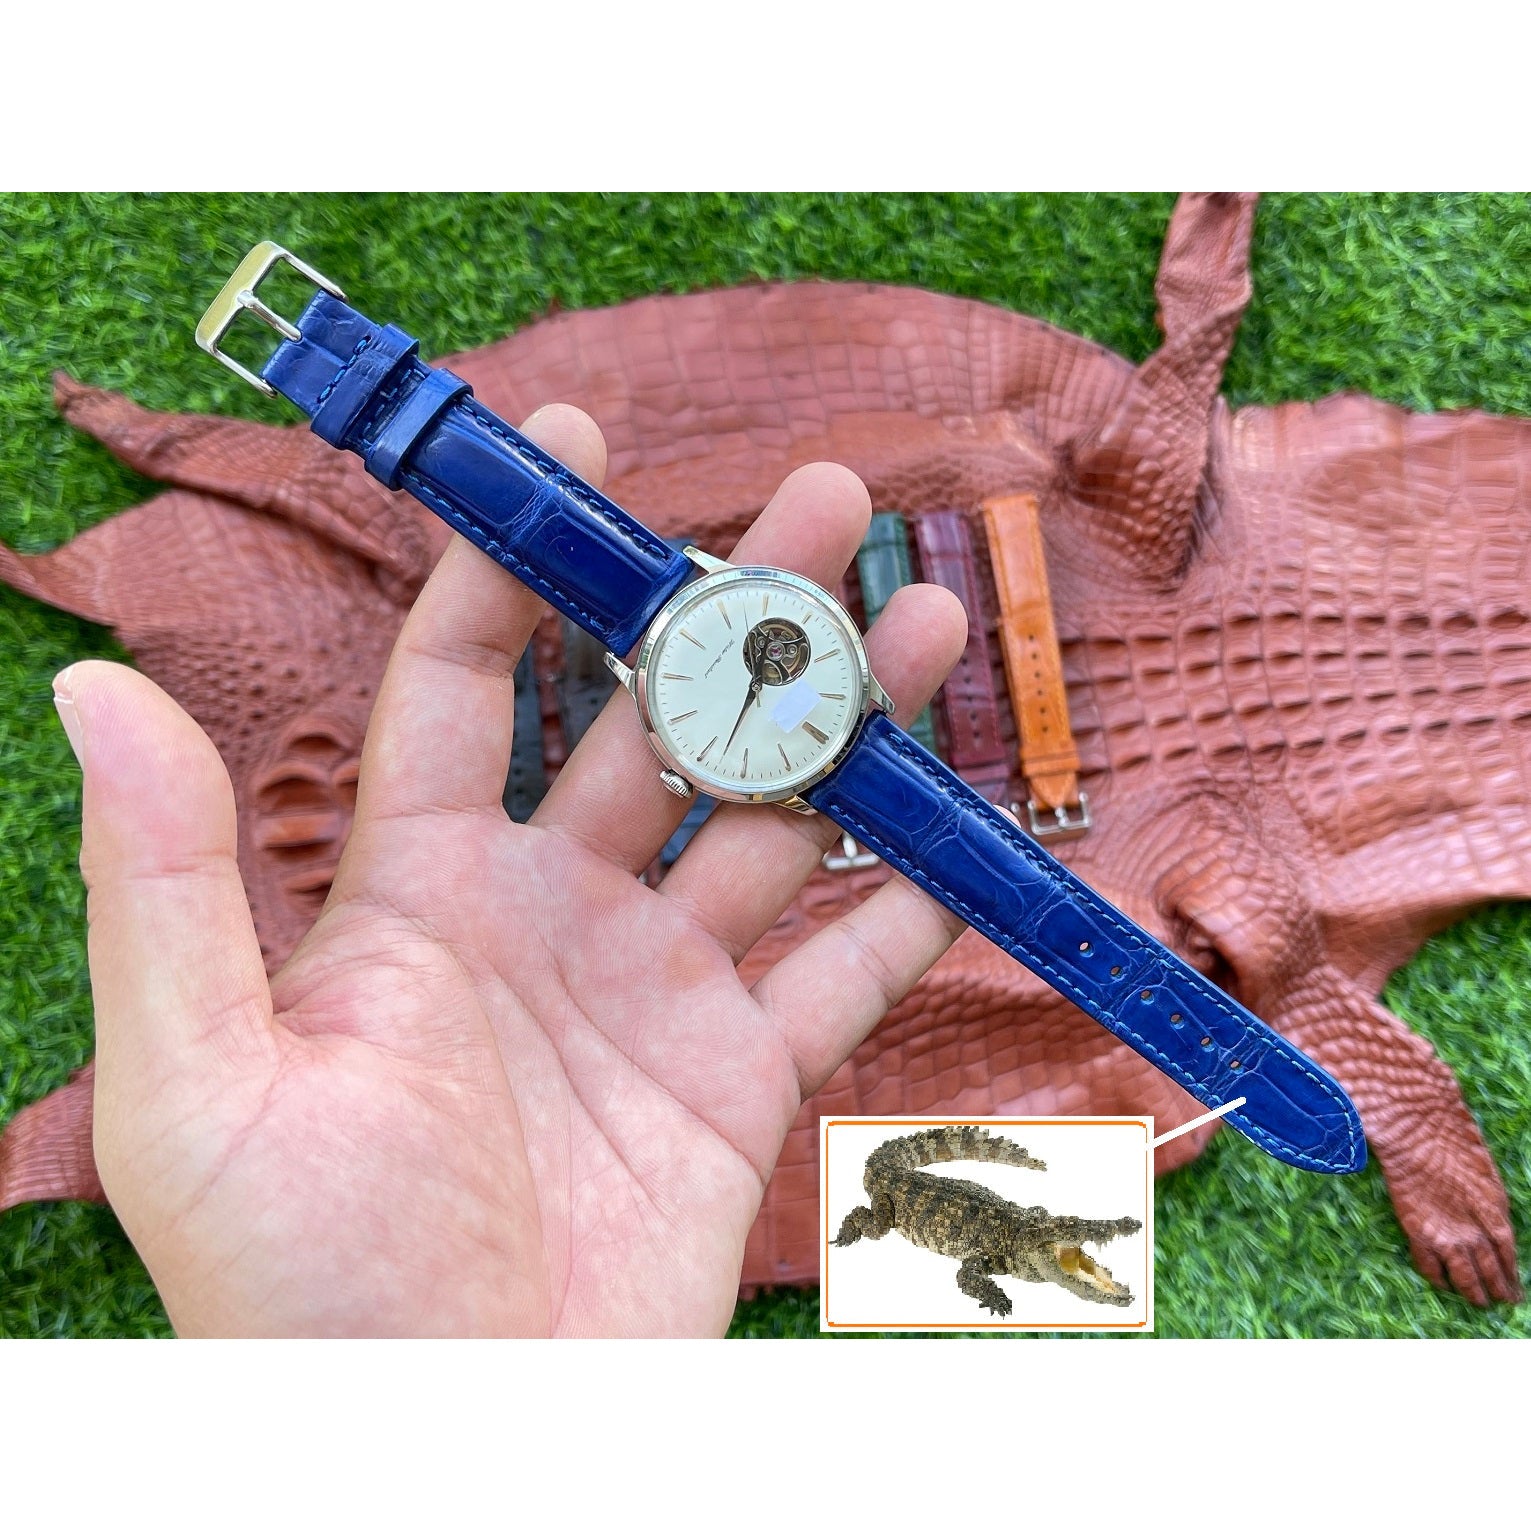 Handmade Light Blue Alligator Leather Watch Band For Men | Premium Crocodile Quick Release Replacement Wristwatch Strap | DH-05 - Vinacreations